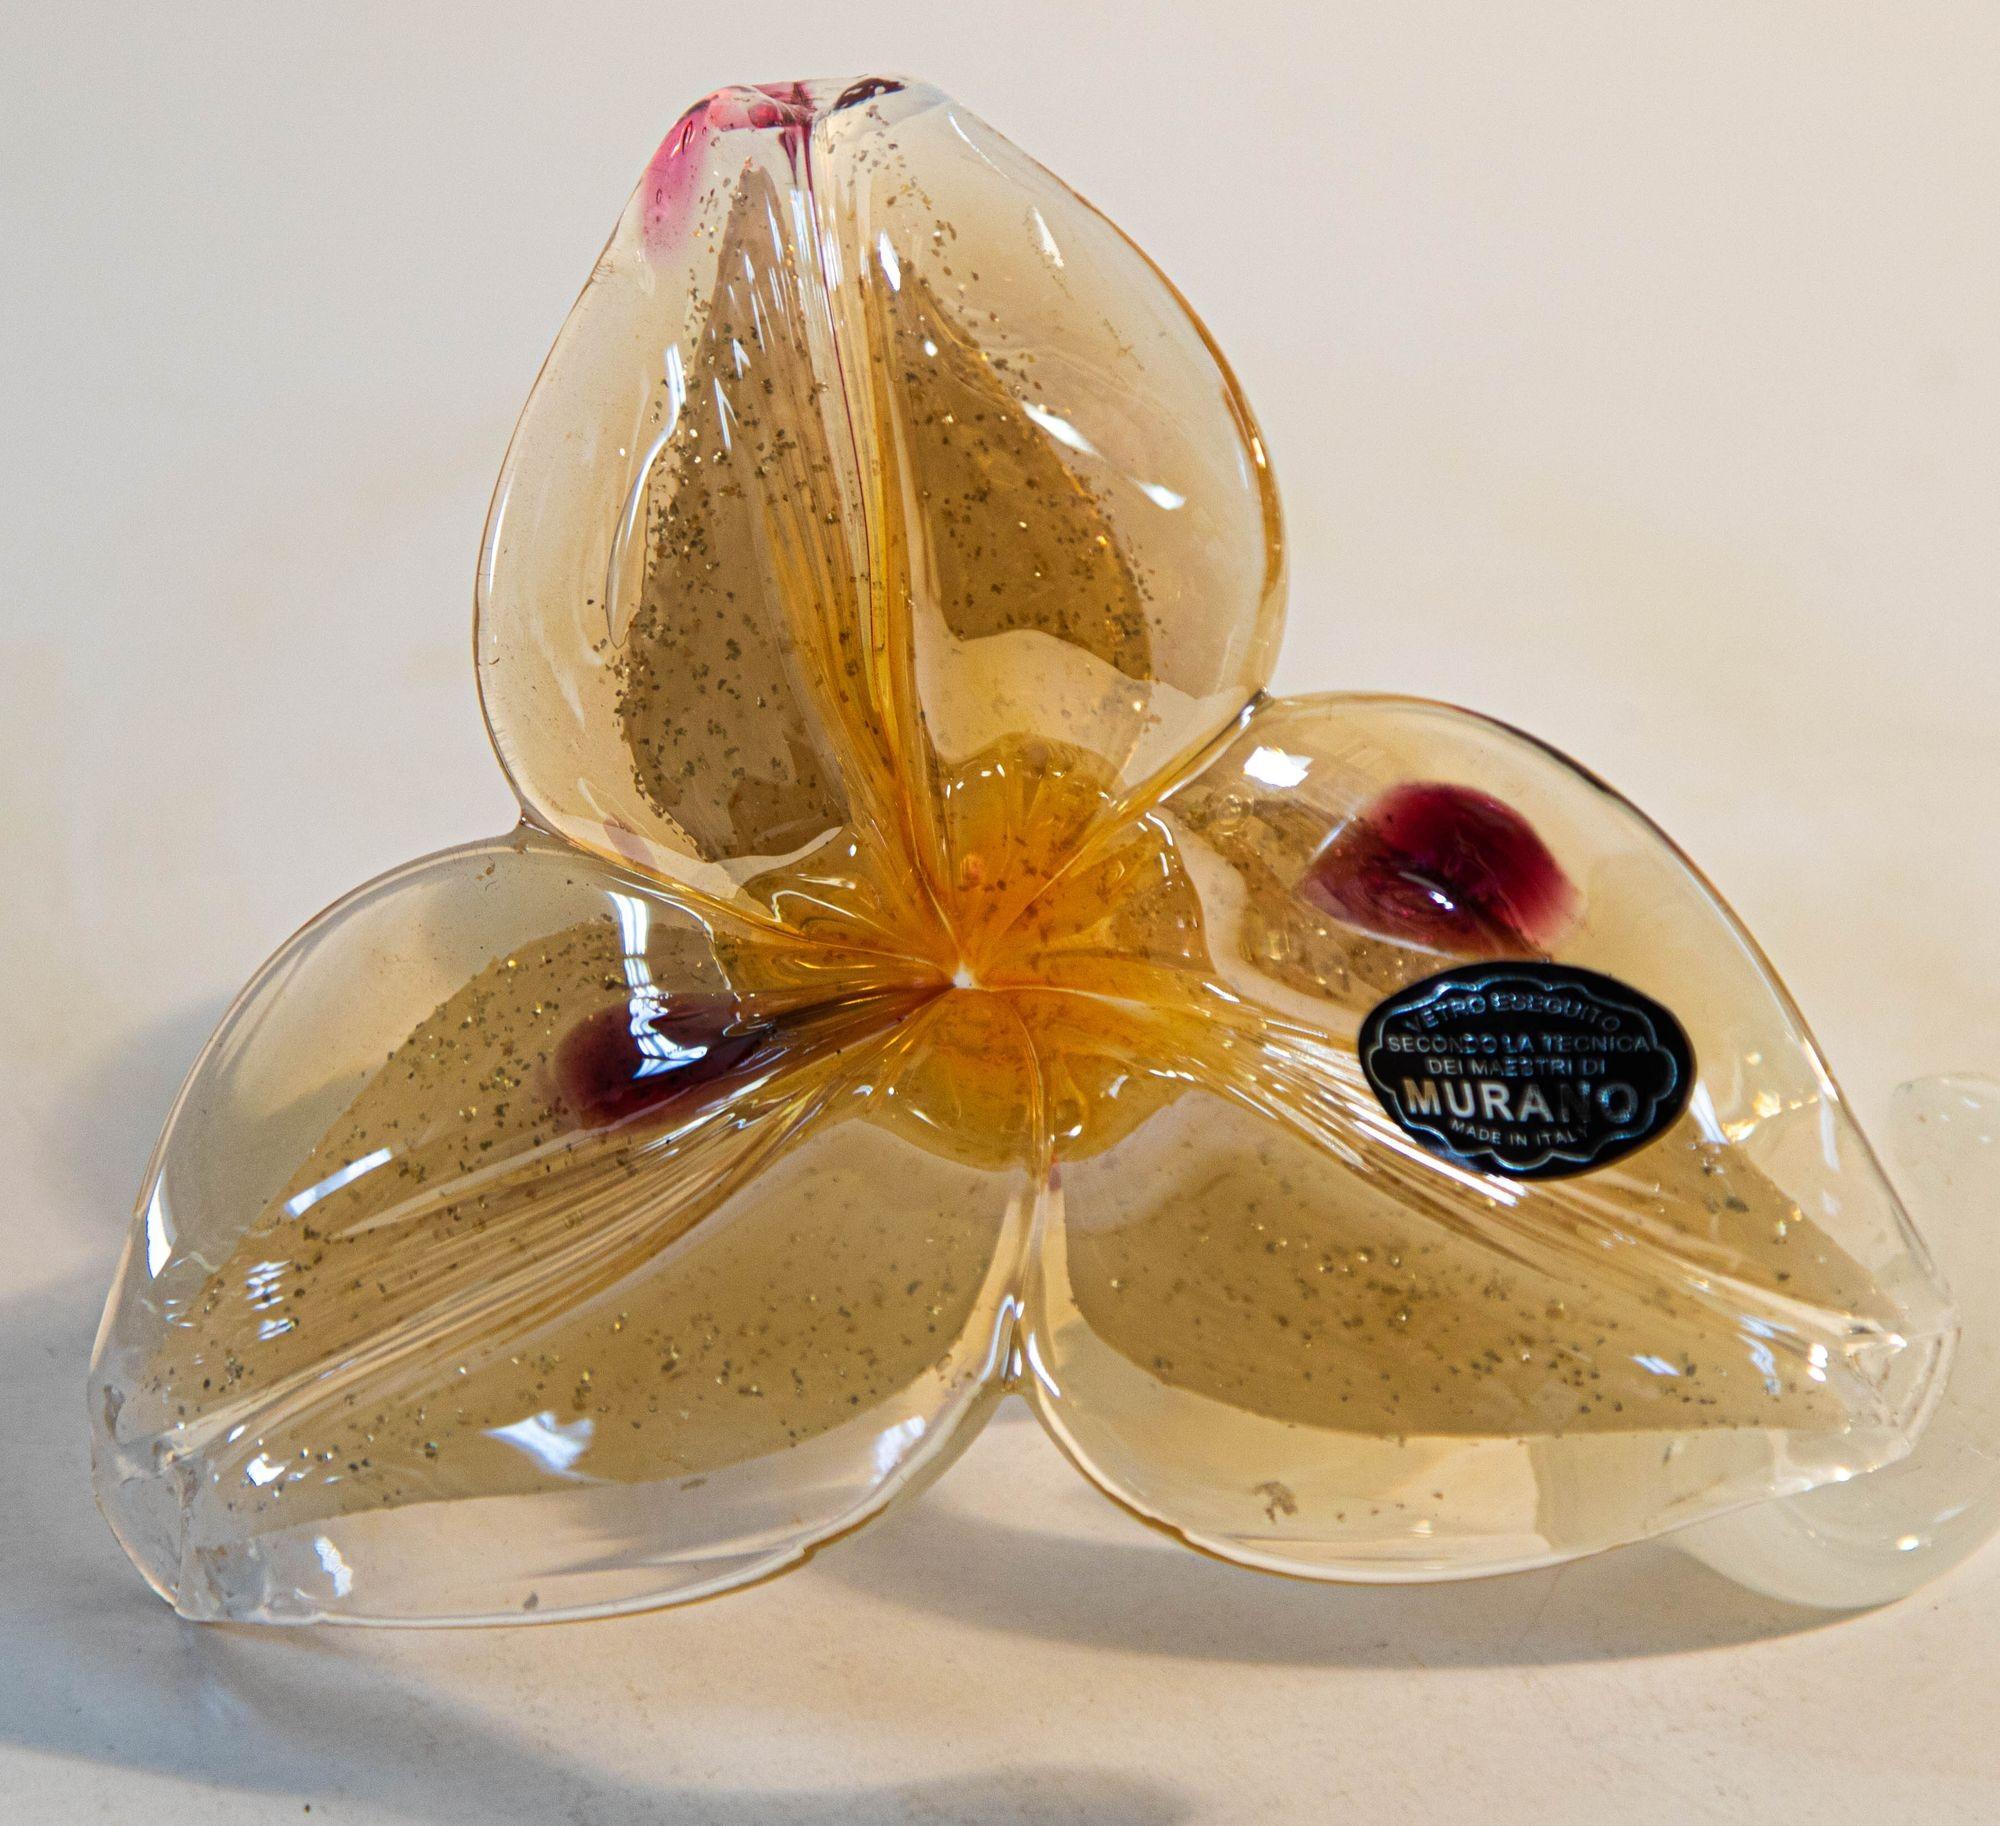 Italian Murano Art Glass Paperweight Lily Flower with Curled Stem Sculpture 1980 For Sale 5